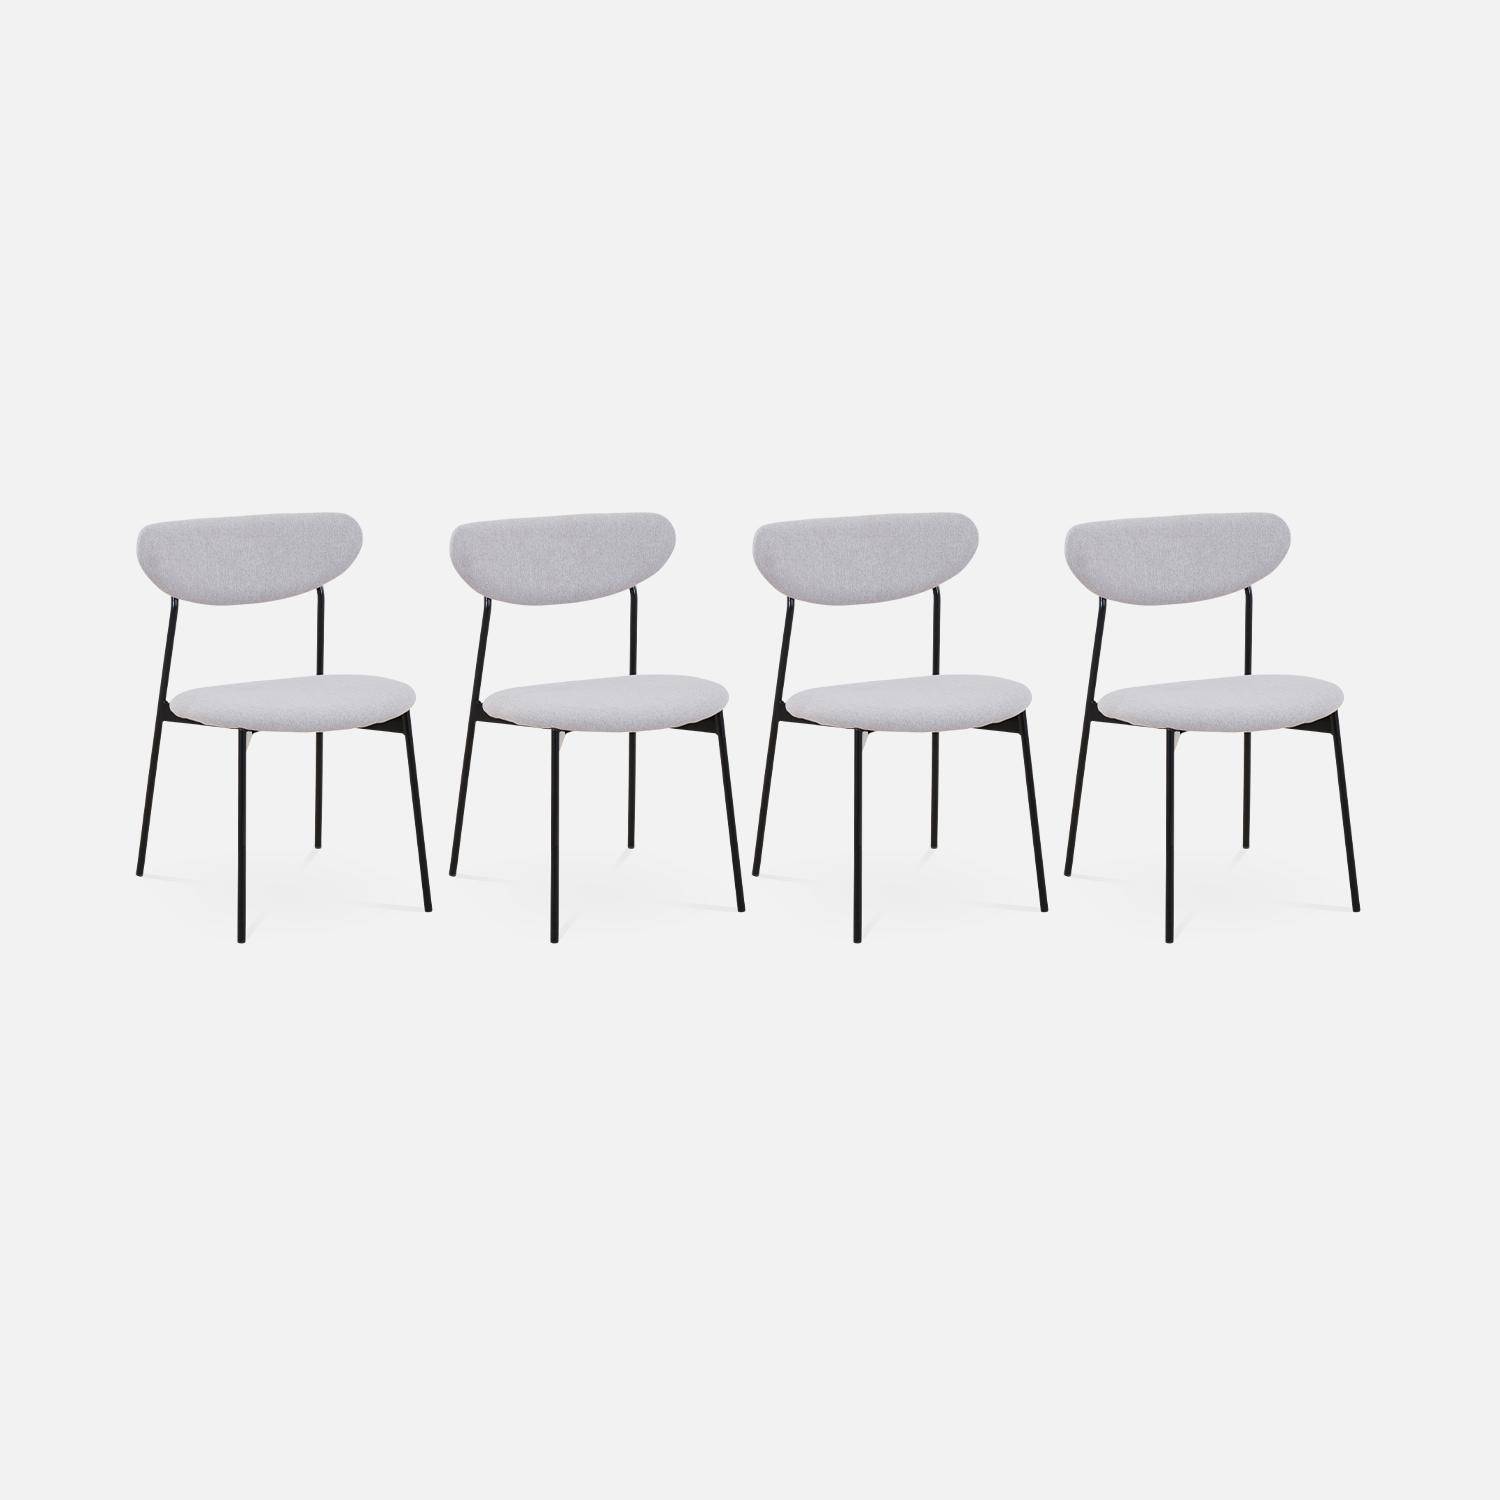 Set of 4 retro style dining chairs with steel legs - Arty - Light Grey Photo3